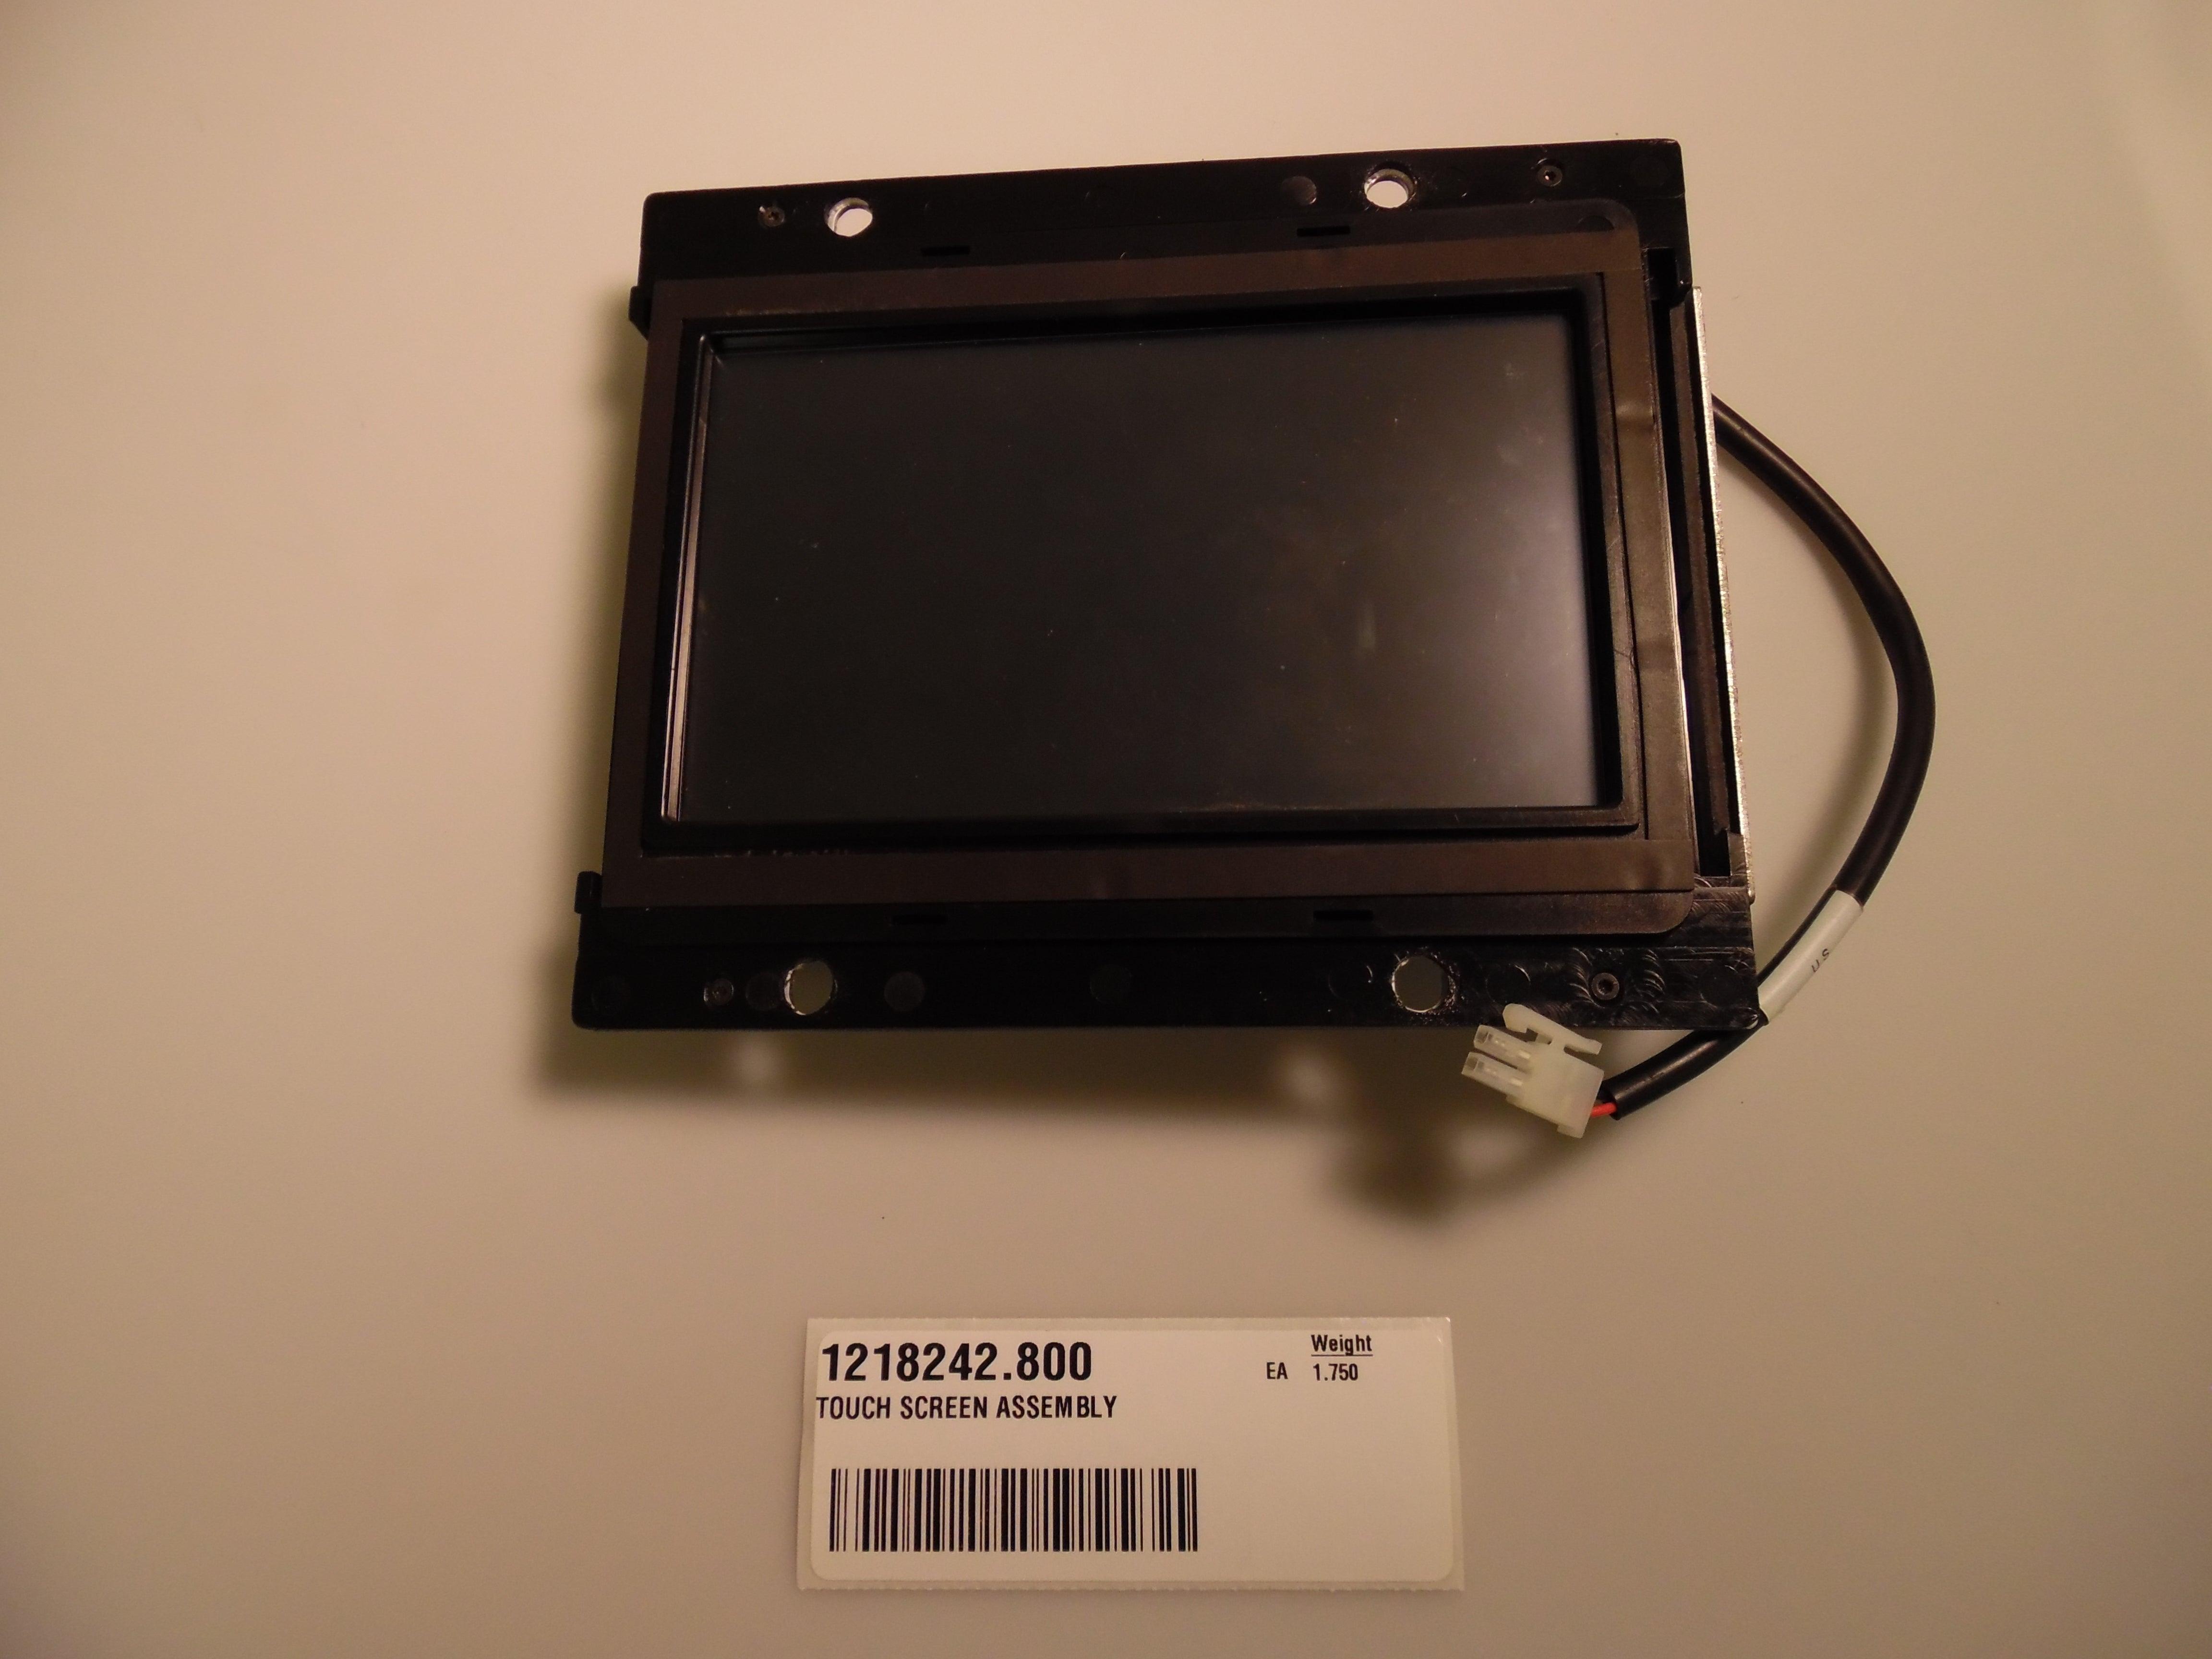 TOUCH SCREEN ASSEMBLY - Vendnet